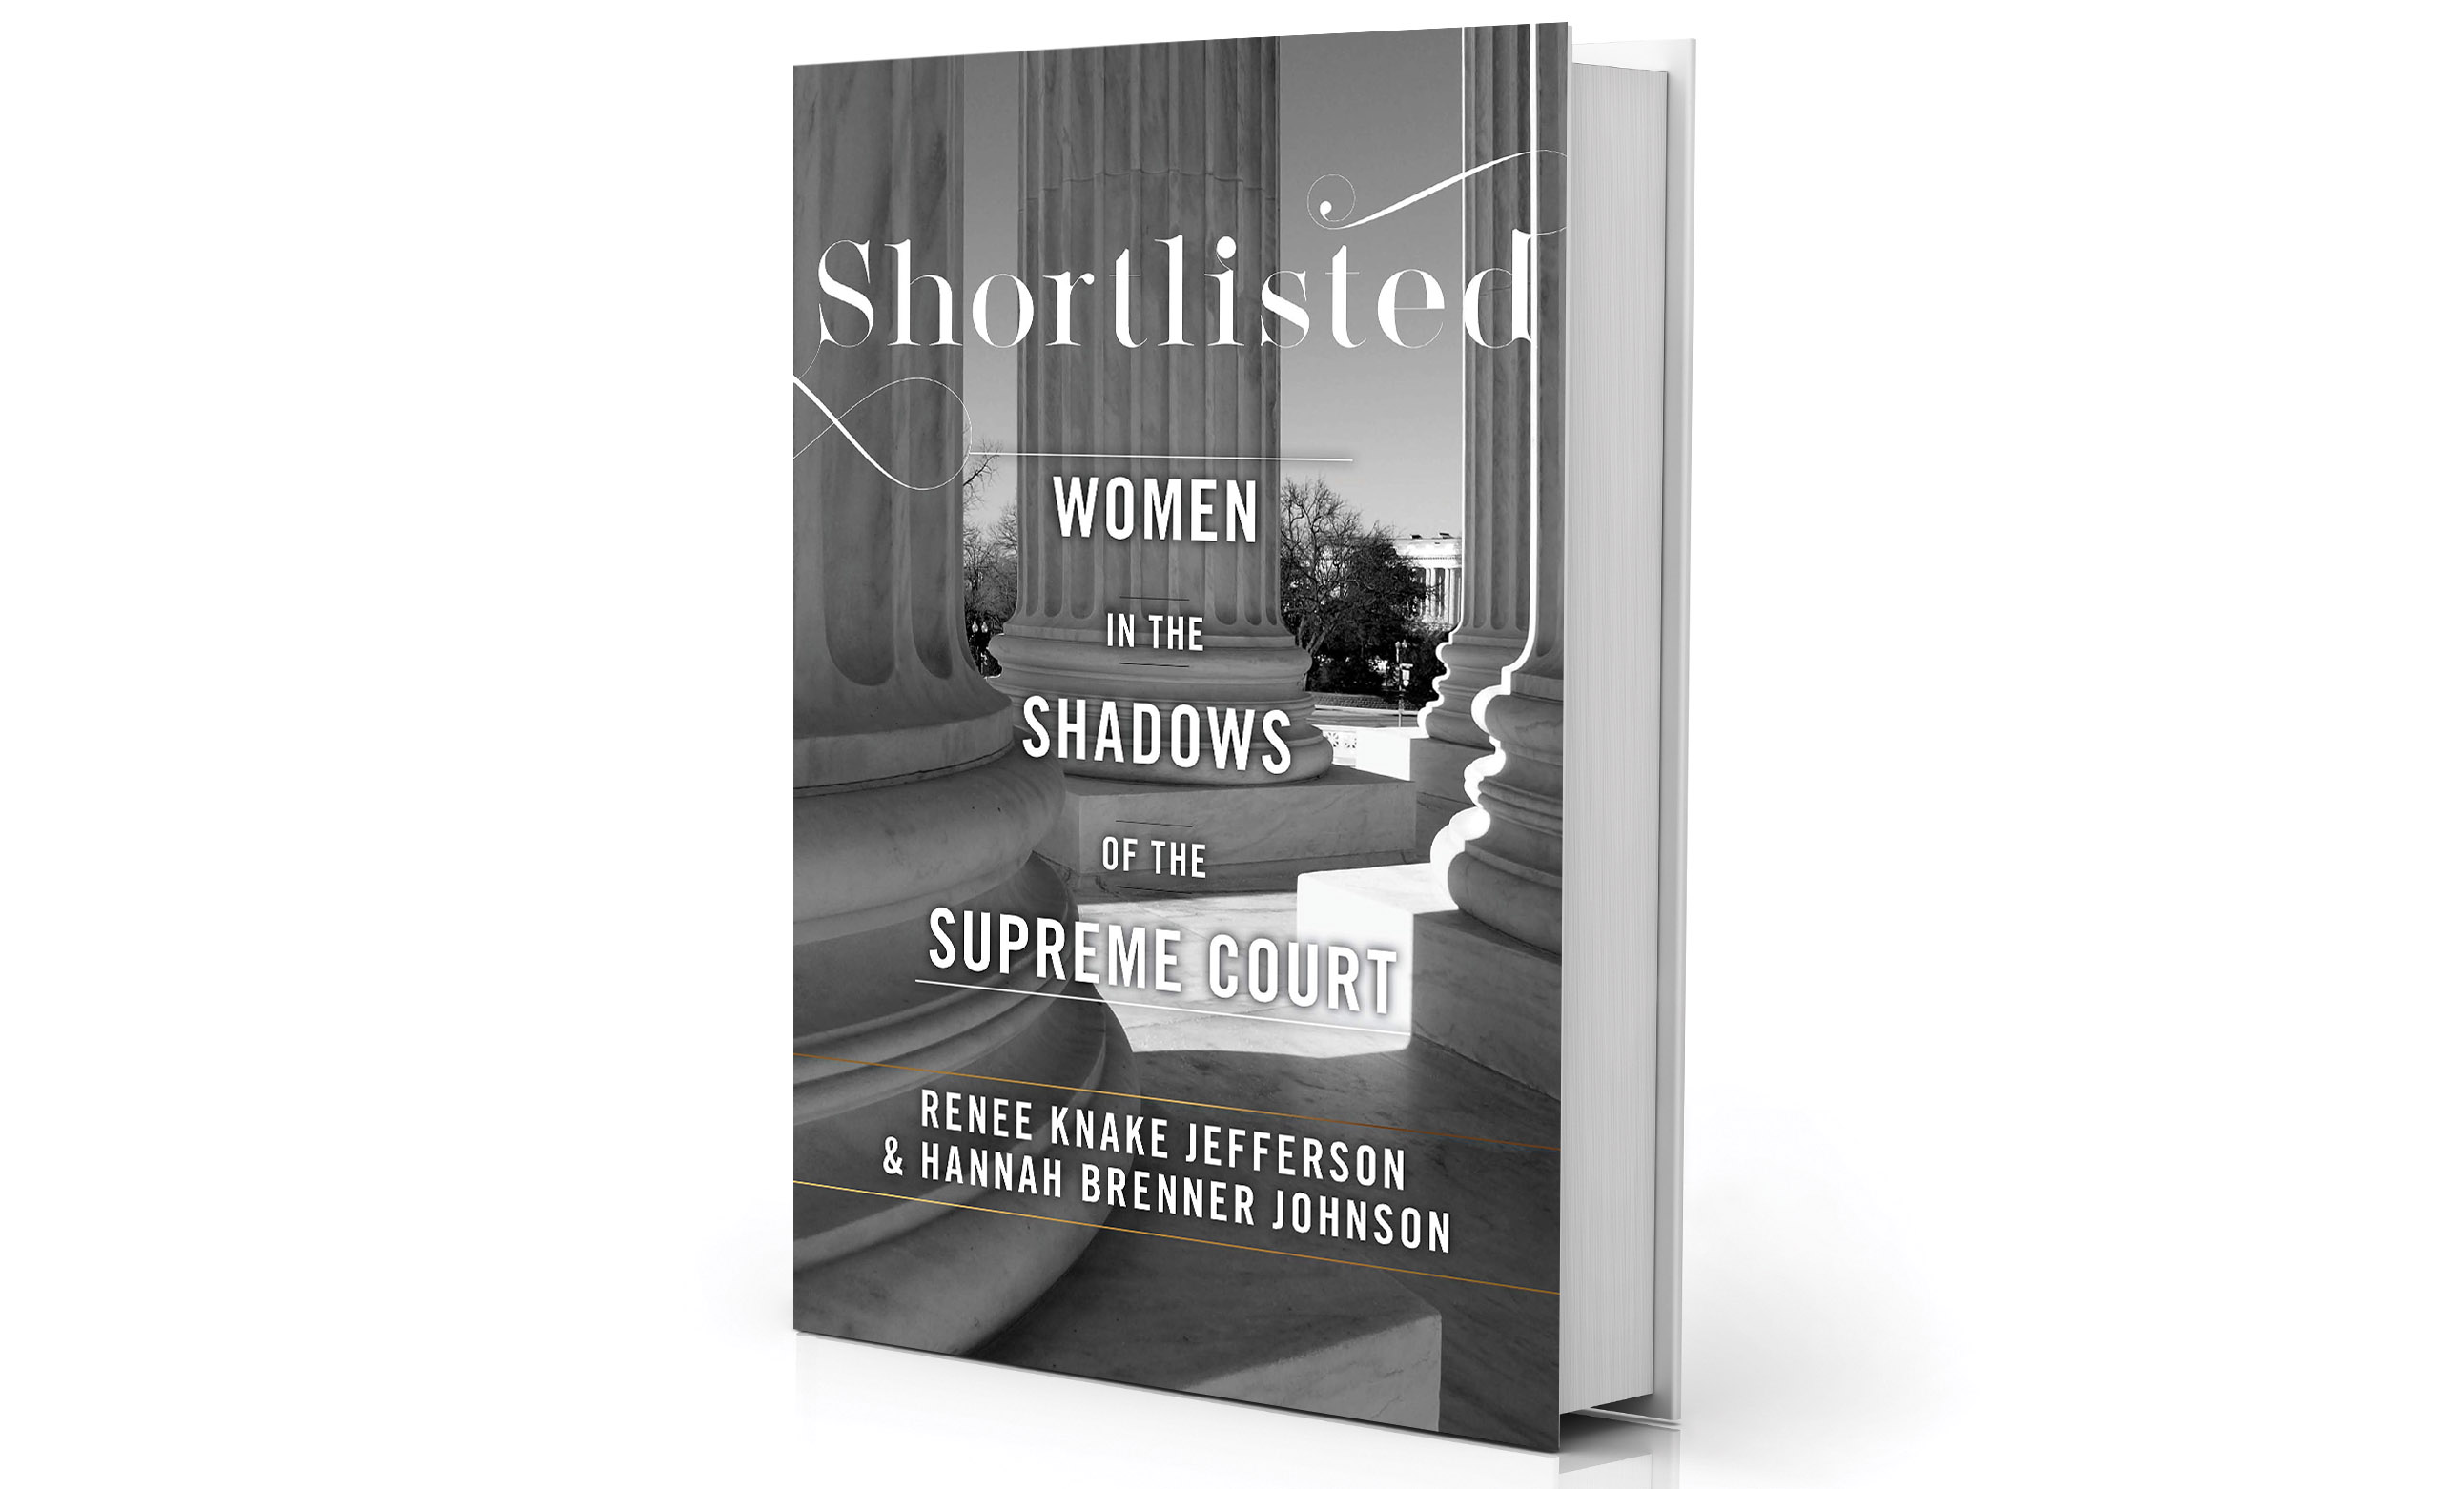 Book cover: “Shortlisted: Women in the Shadows of the Supreme Court”